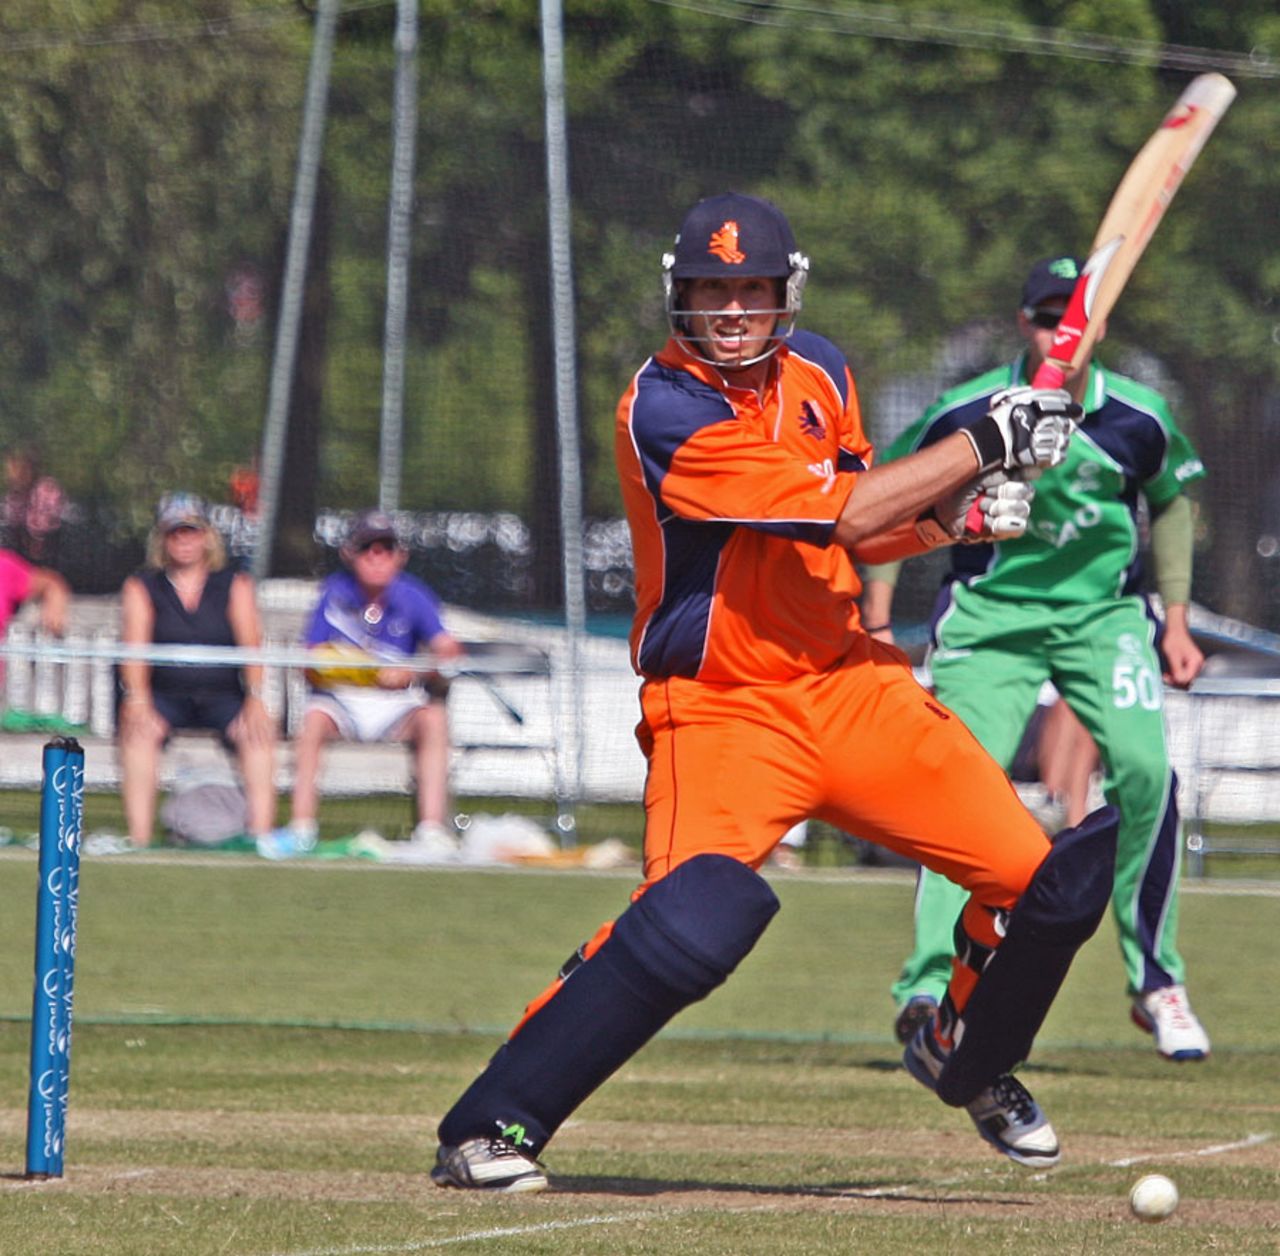 Daan van Bunge cuts the ball during his innings of 45, Netherlands v Ireland, WCL Championship, Amstelveen, July 9, 2013